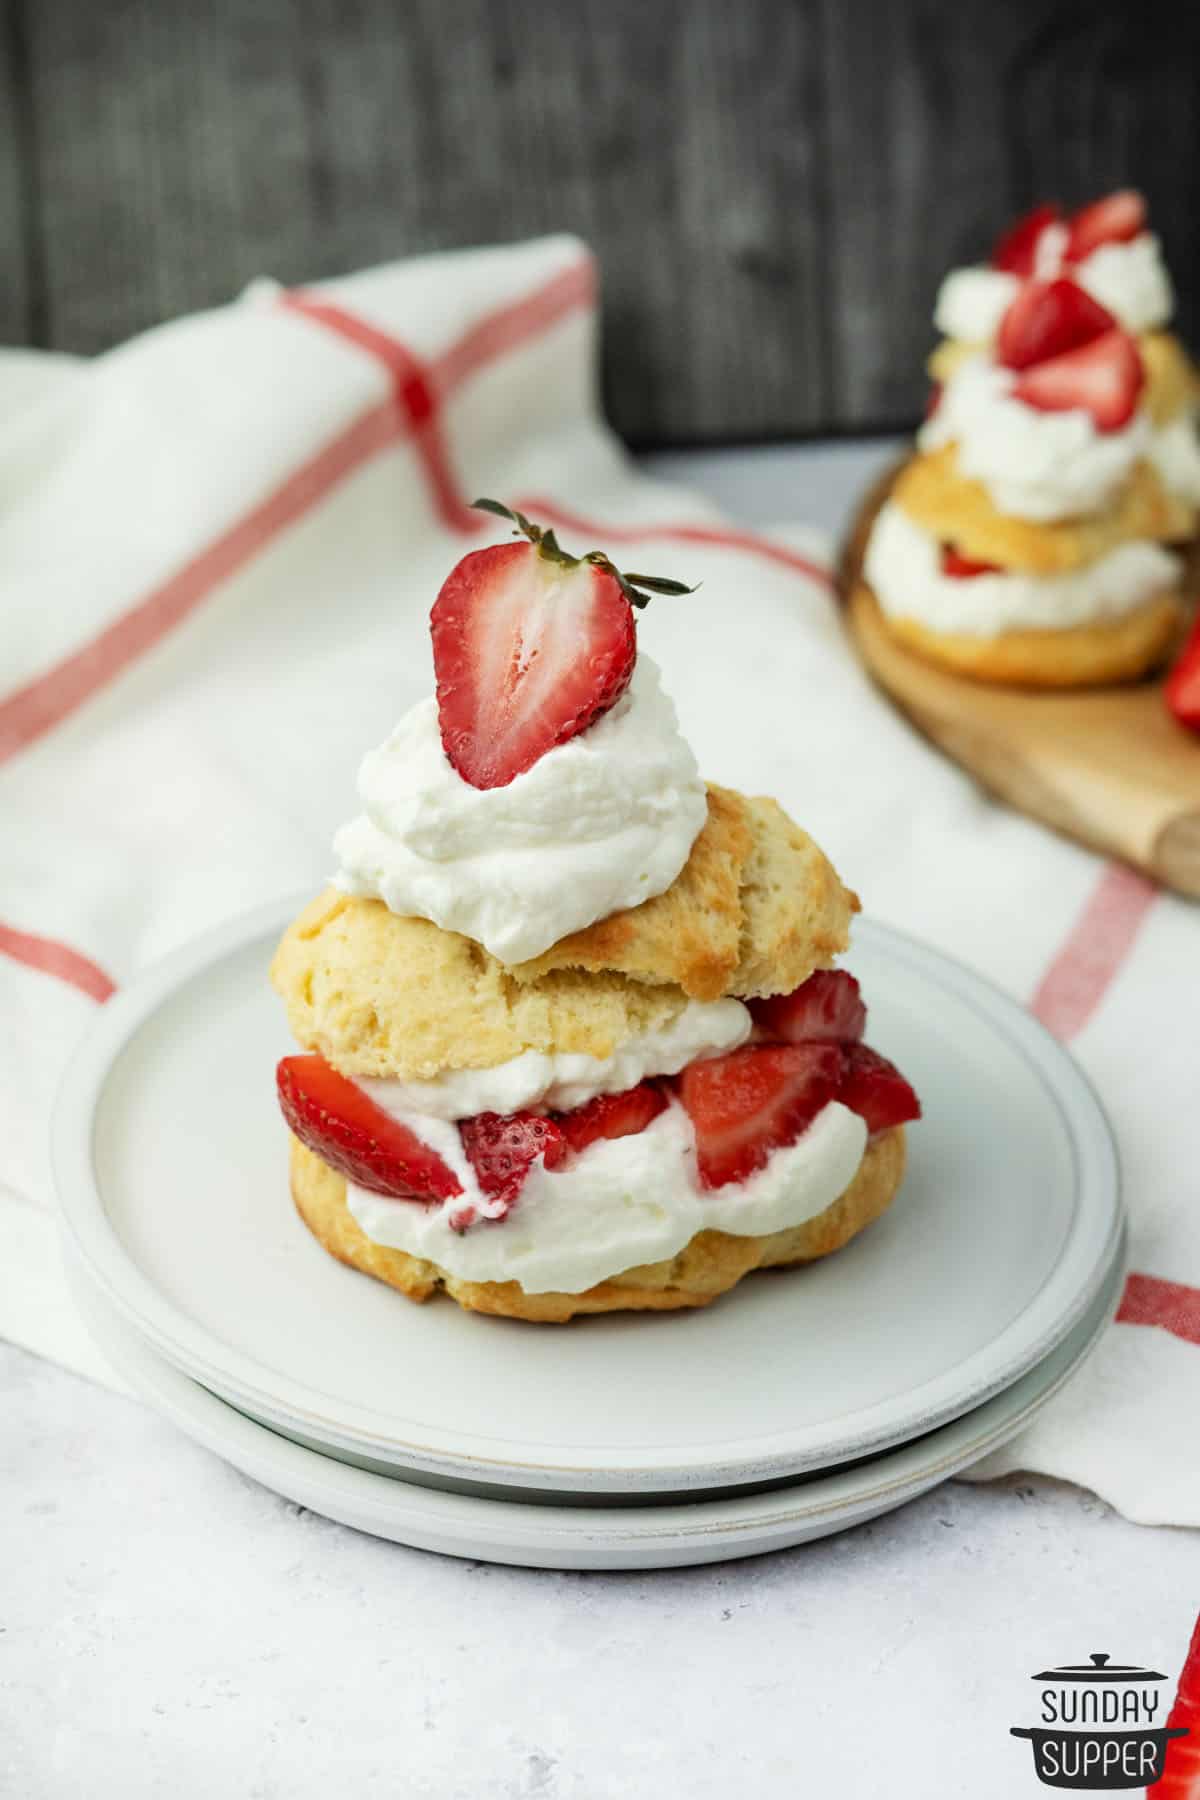 strawberry shortcake with homemade biscuits and whipped cream on a plate